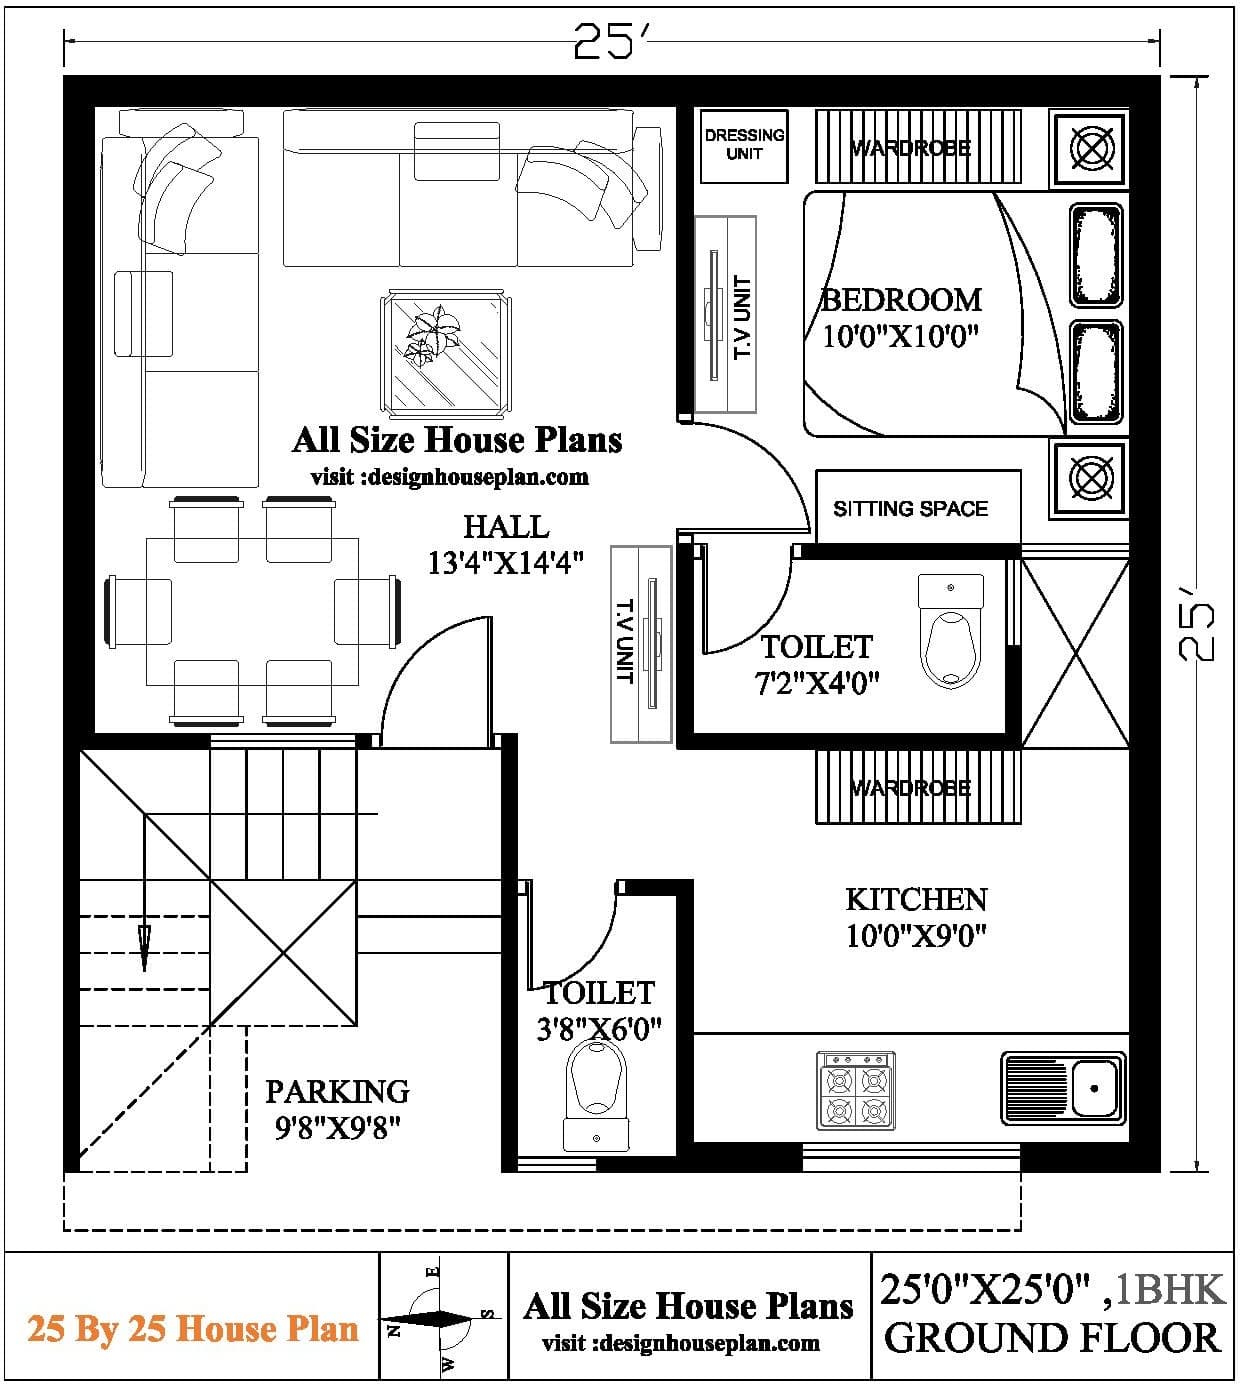 25 by 25 house plan